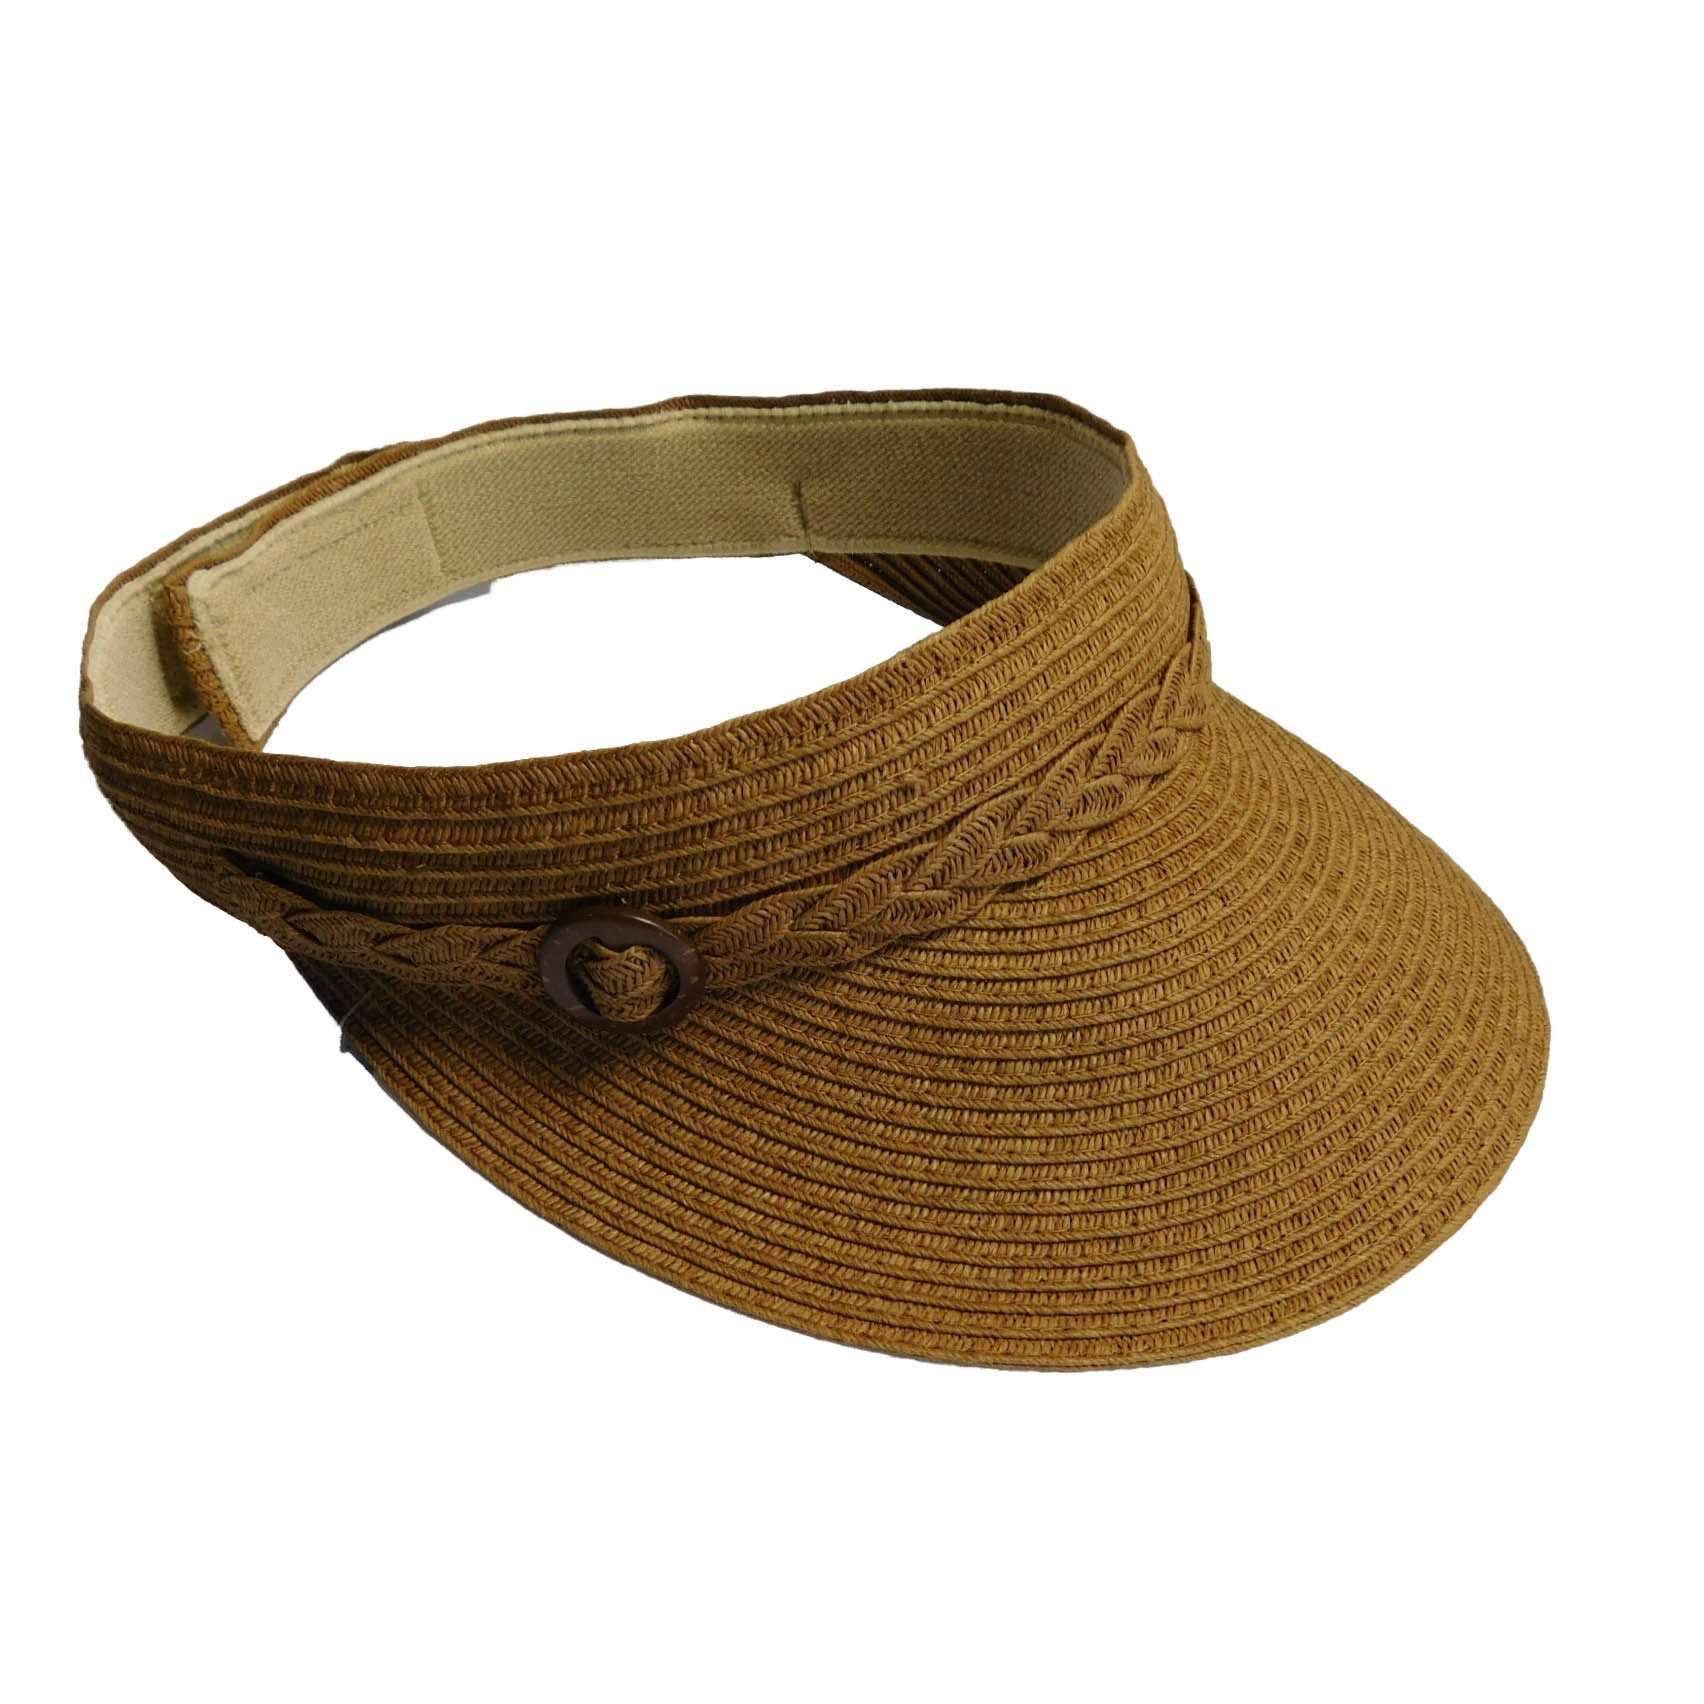 Straw Visor with Buckle Accent Visor Cap Boardwalk Style Hats WSPS656BN Brown  